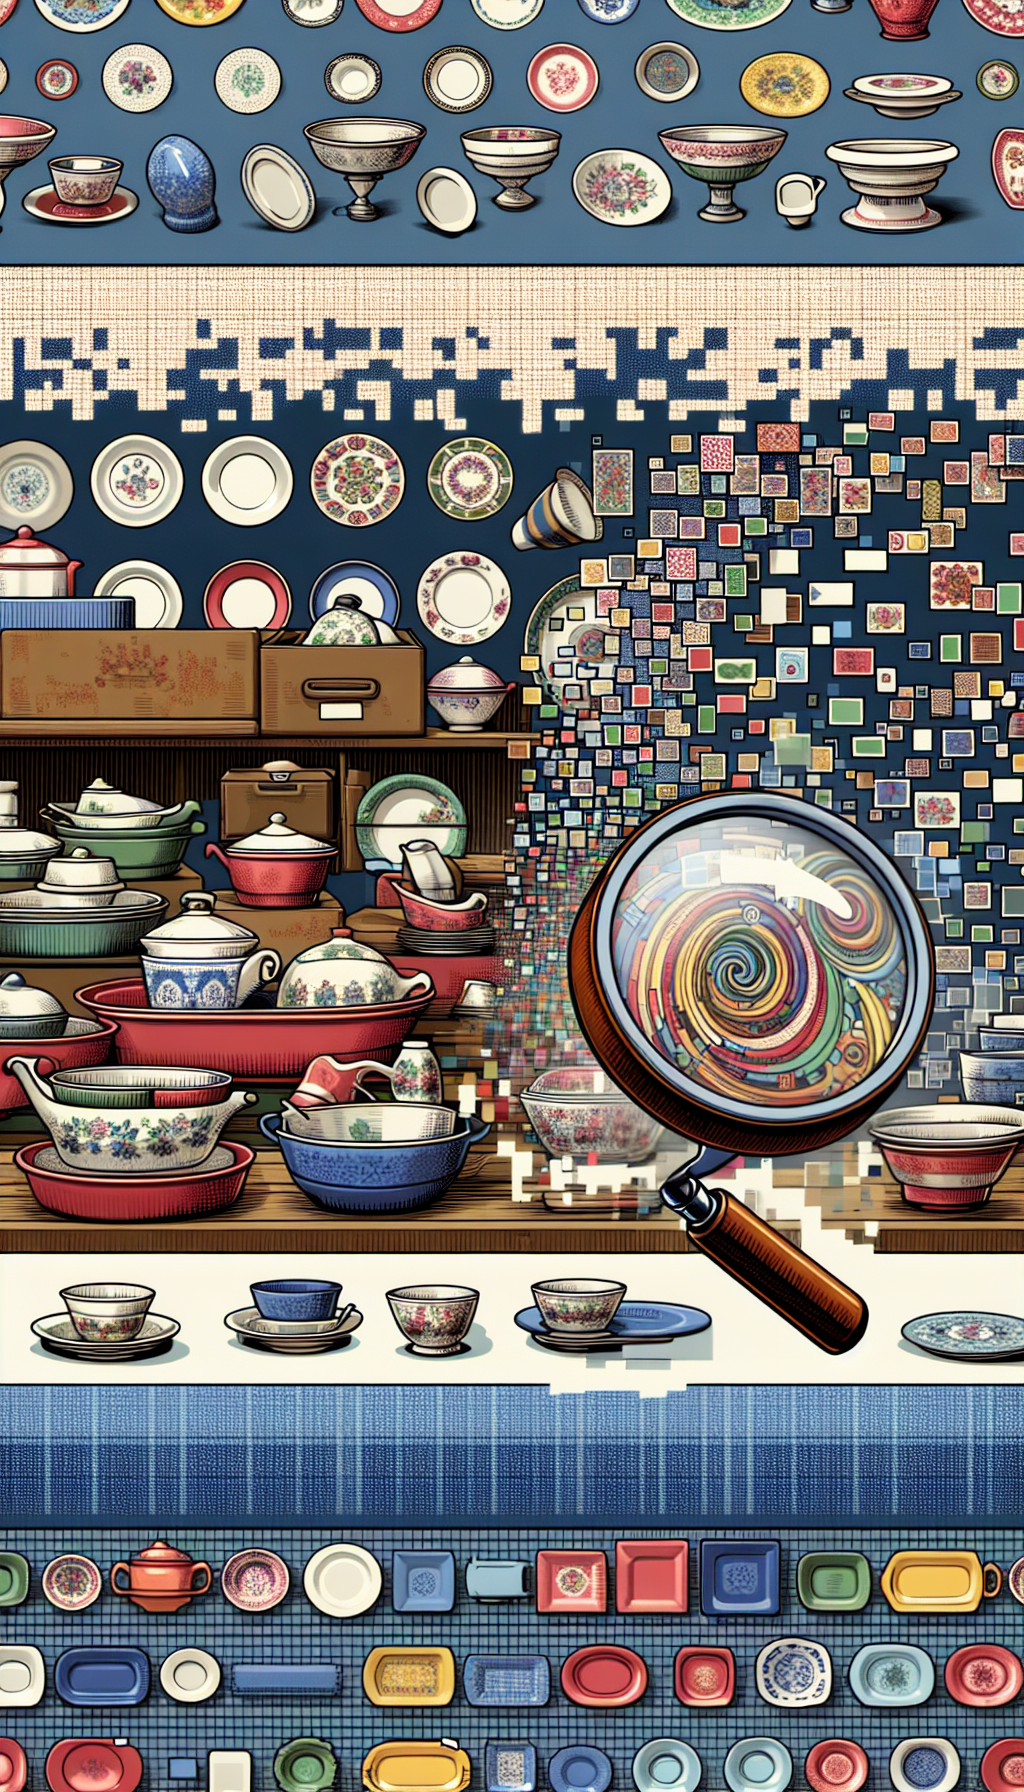 An illustration depicting a bustling flea market scene transitioning into a pixelated online auction platform, with vintage CorningWare and Corelle pieces prominently displayed. Amongst them, an animated magnifying glass hovers, revealing a whimsical, swirling pattern identifier, highlighting a rare pattern within a vibrant patchwork of tableware designs, merging traditional and digital motifs into a coherent visual narrative.